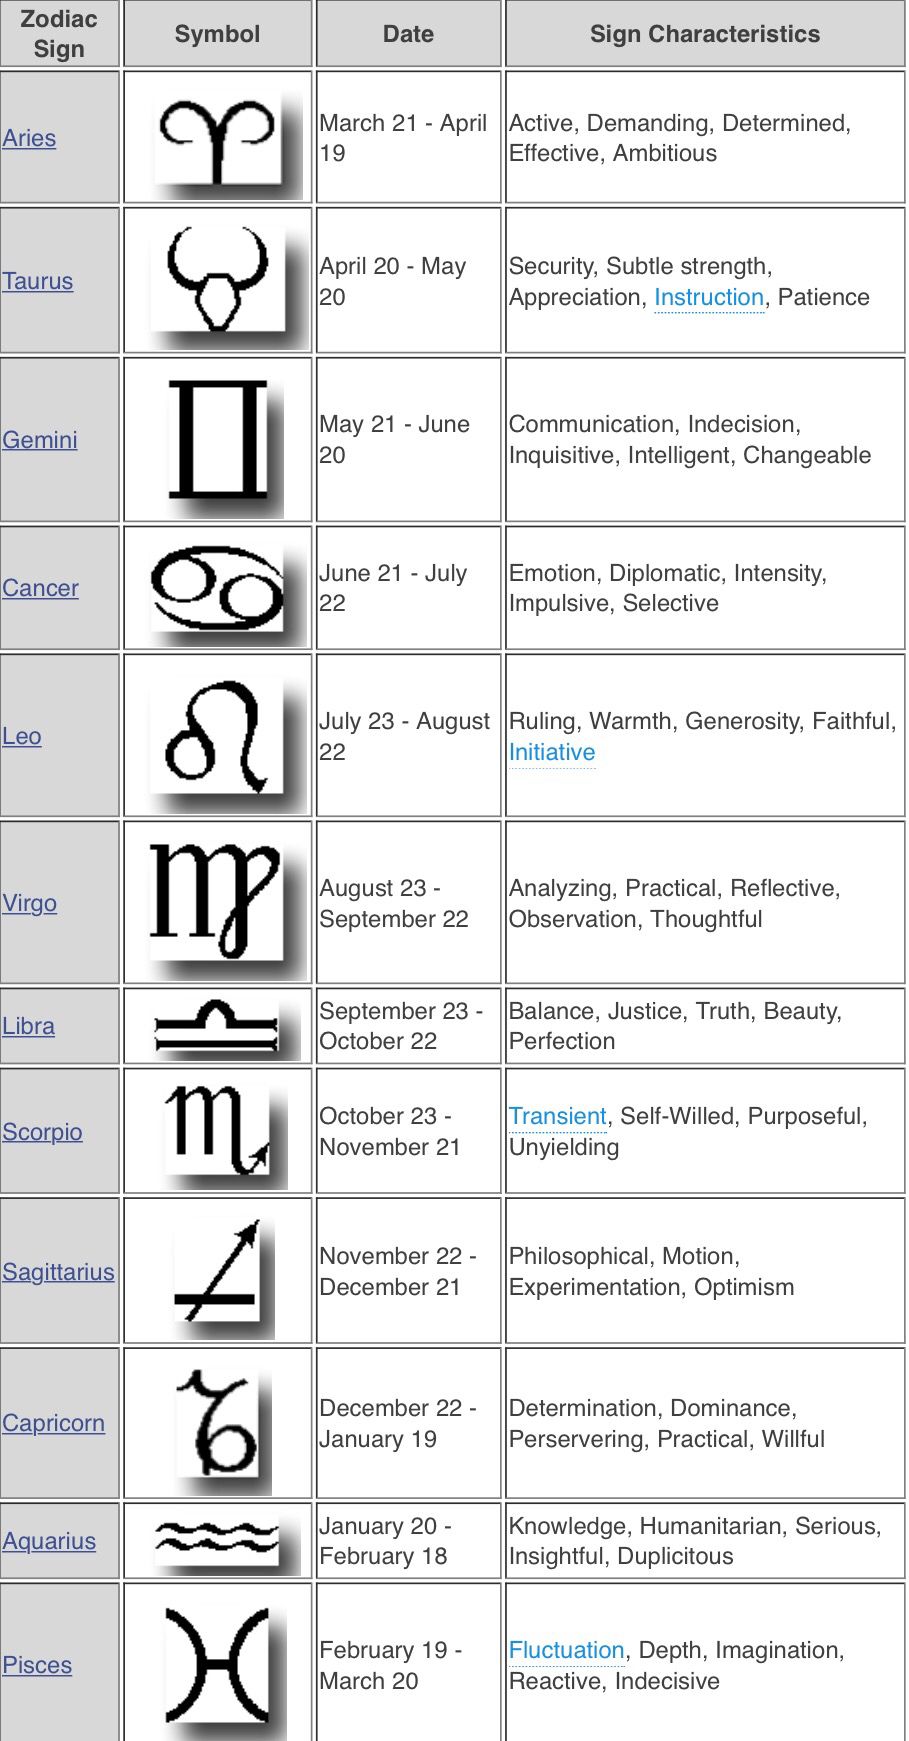 What Are The Dates Of The Zodiac Signs?